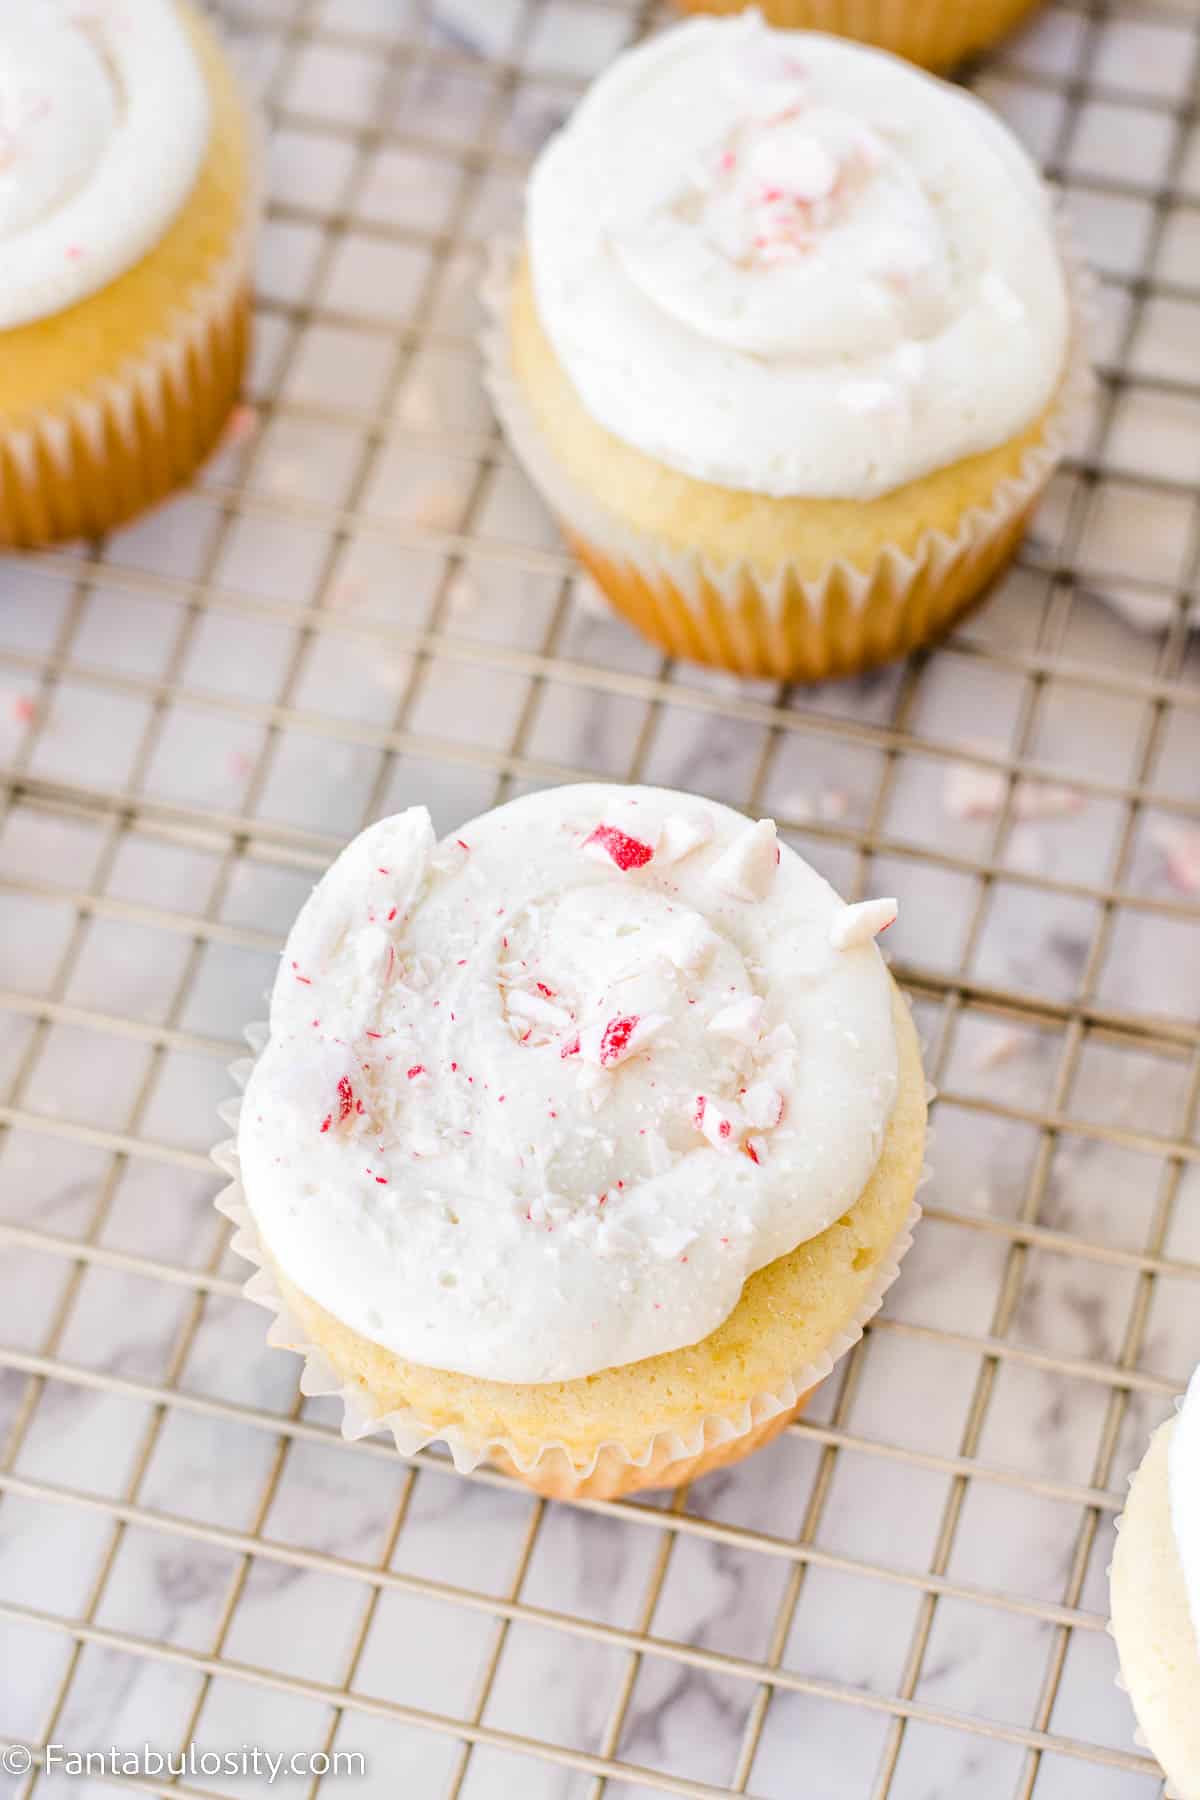 Peppermint candies on top of cupcakes